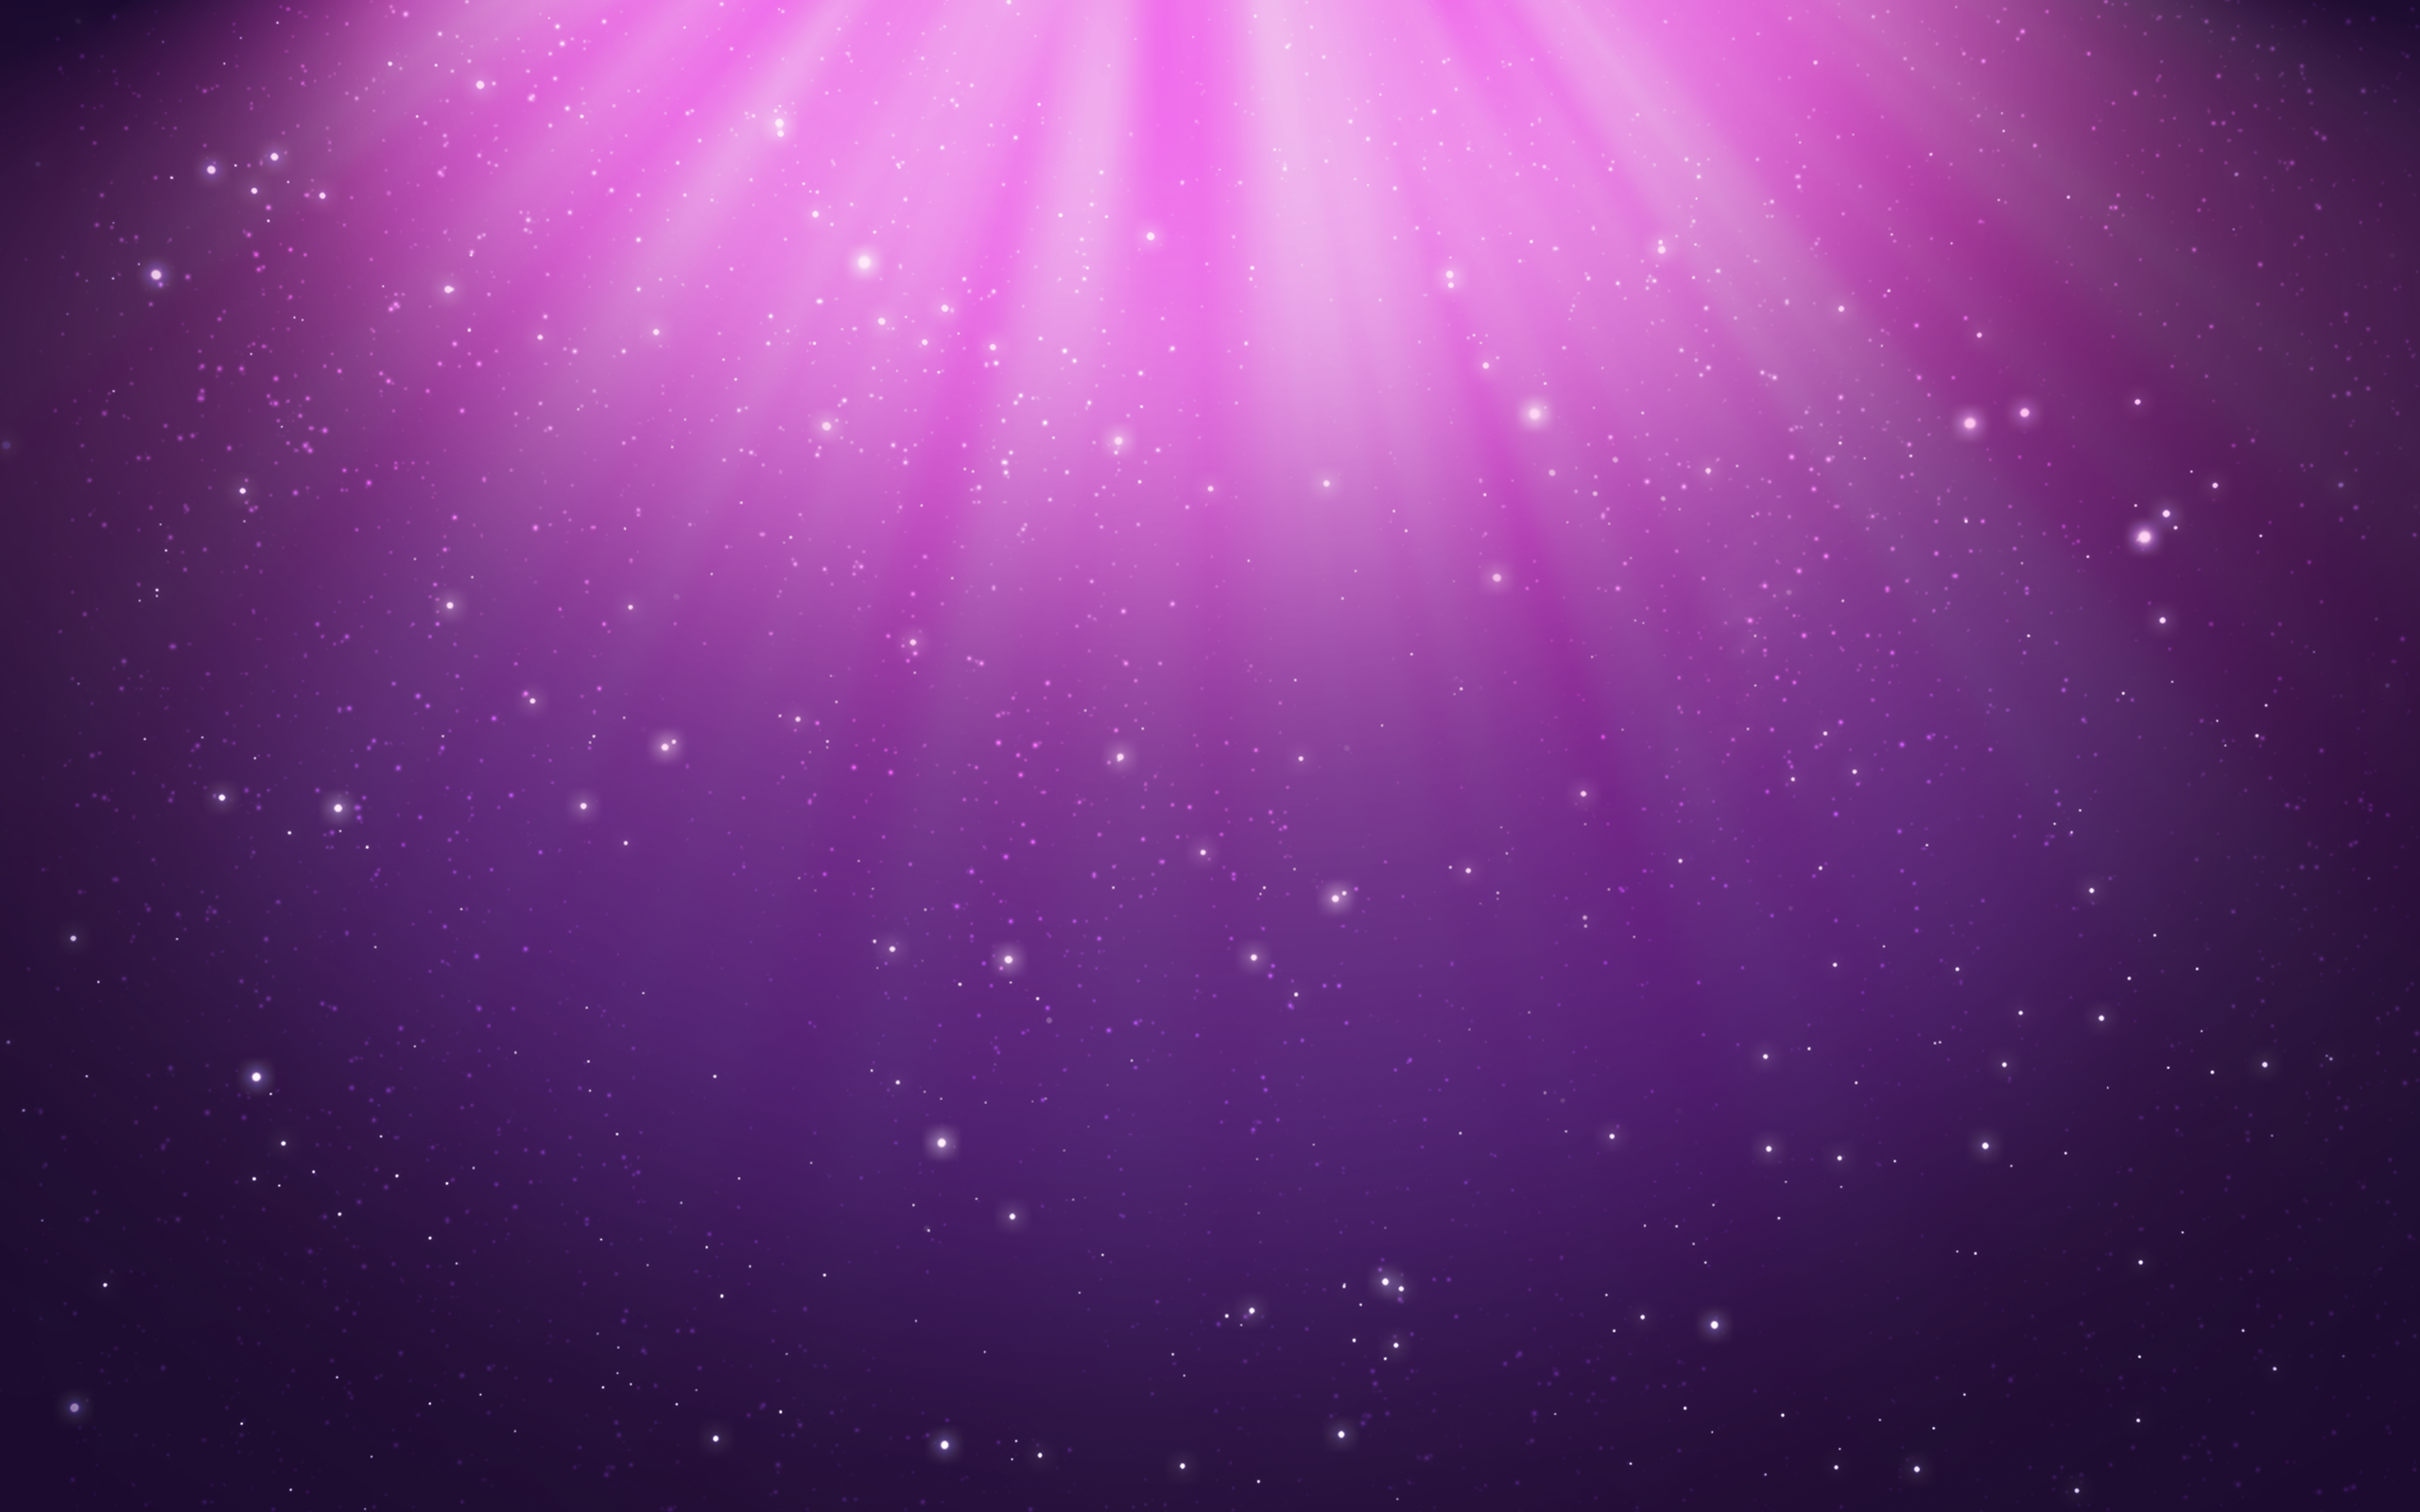 Full HD Wallpapers + Backgrounds, Space, Stars, Purple